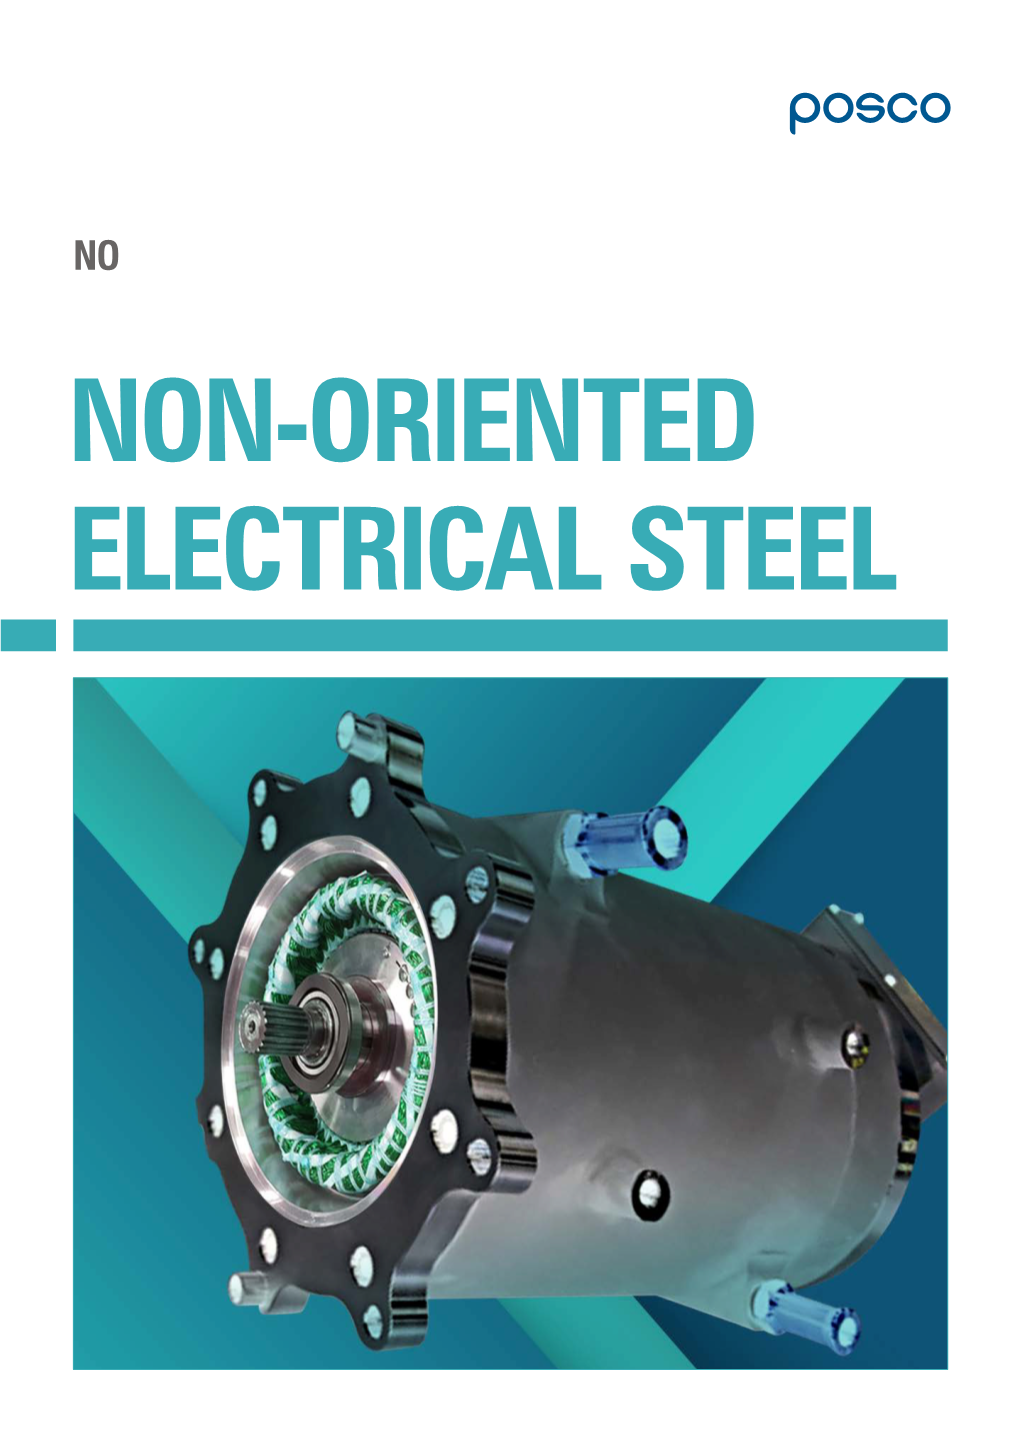 NON-ORIENTED ELECTRICAL STEEL Electrical Steels Have Excellent Electro-Magnetic Properties